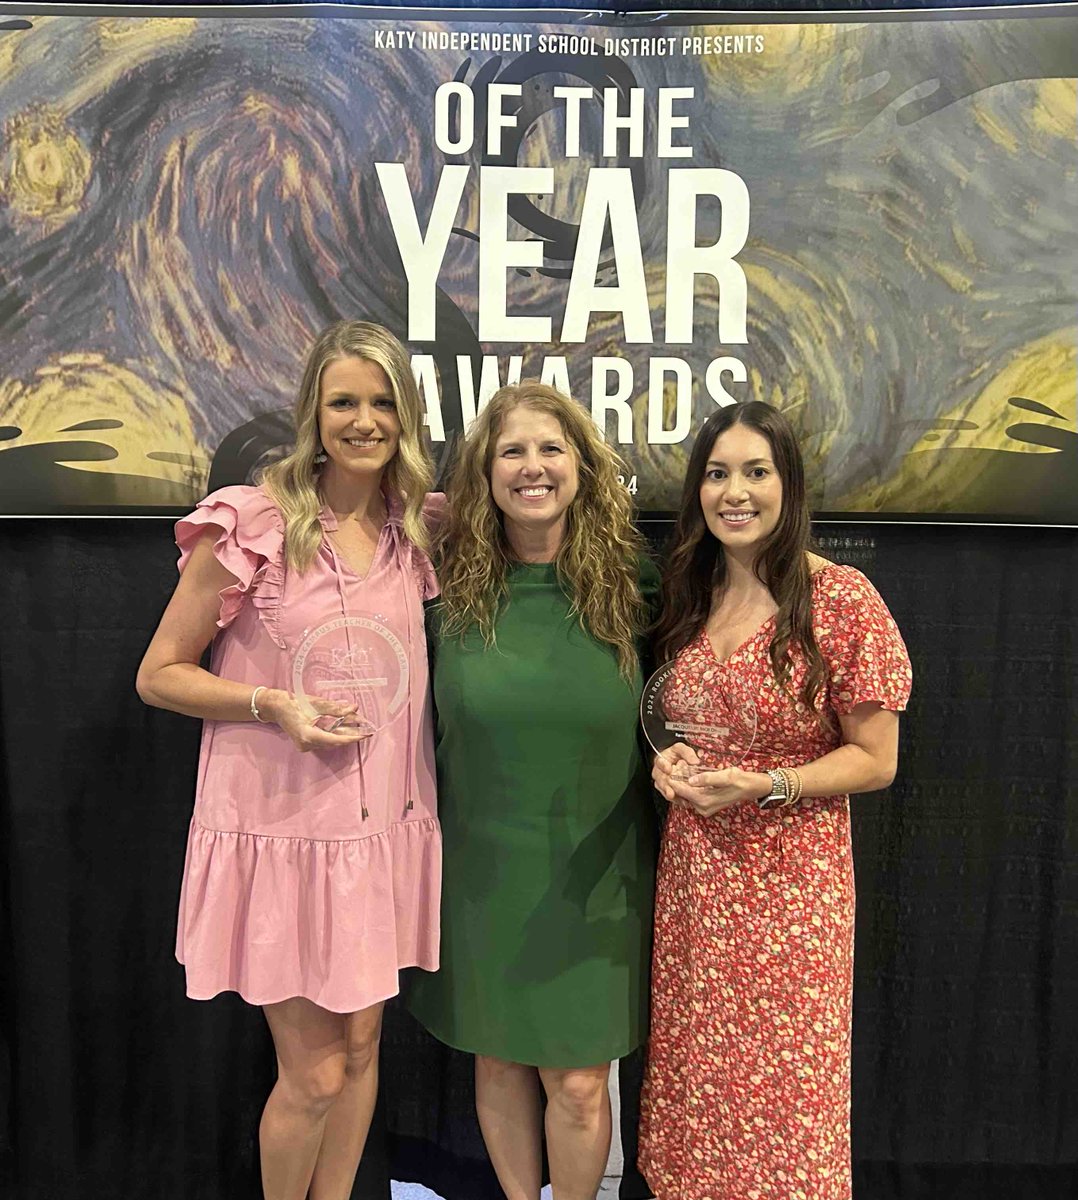 These two amazing educators were honored tonight by the District at the “Of the Year Awards.”  They are so deserving of the JRE Teacher of the Year and Rookie Teacher of the Year Awards.  Congrats, Mrs. Stinson and Mrs. Molden! #jrerocks